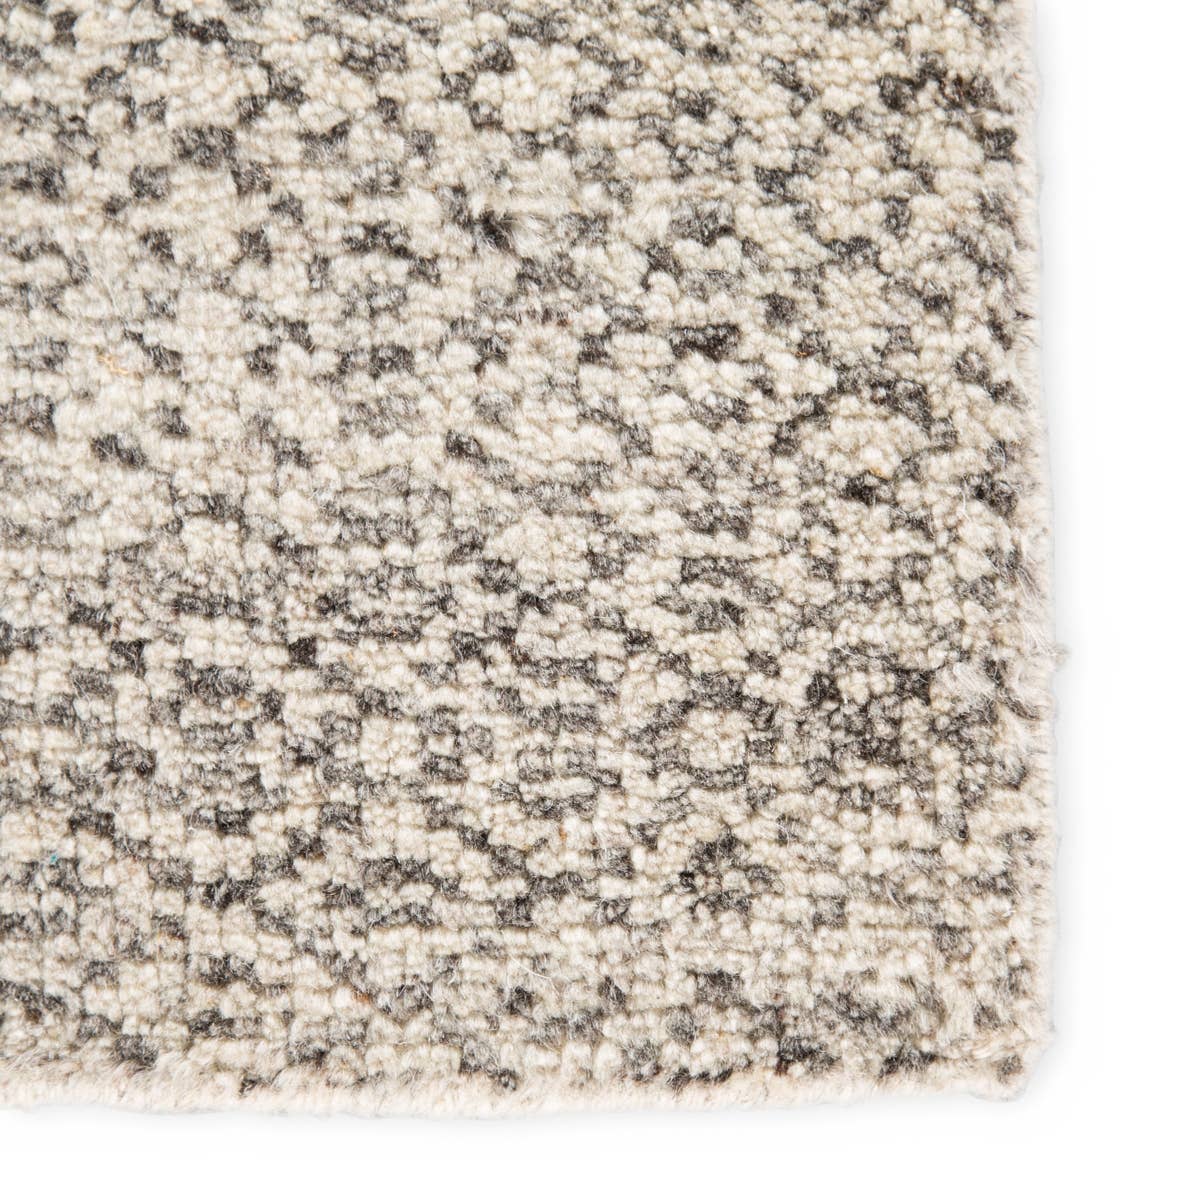 The Rize Neema Area Rugs offers intricate and delicately designed global patterns to the modern home. Small-scale geometric motifs create a captivating banded design on the artistically distressed Neema area rug. In a light neutral colorway of white and gray, this durable hand-knotted wool accent blends a timeless craft with contemporary charm.  Hand Knotted 100% Wool RIZ02